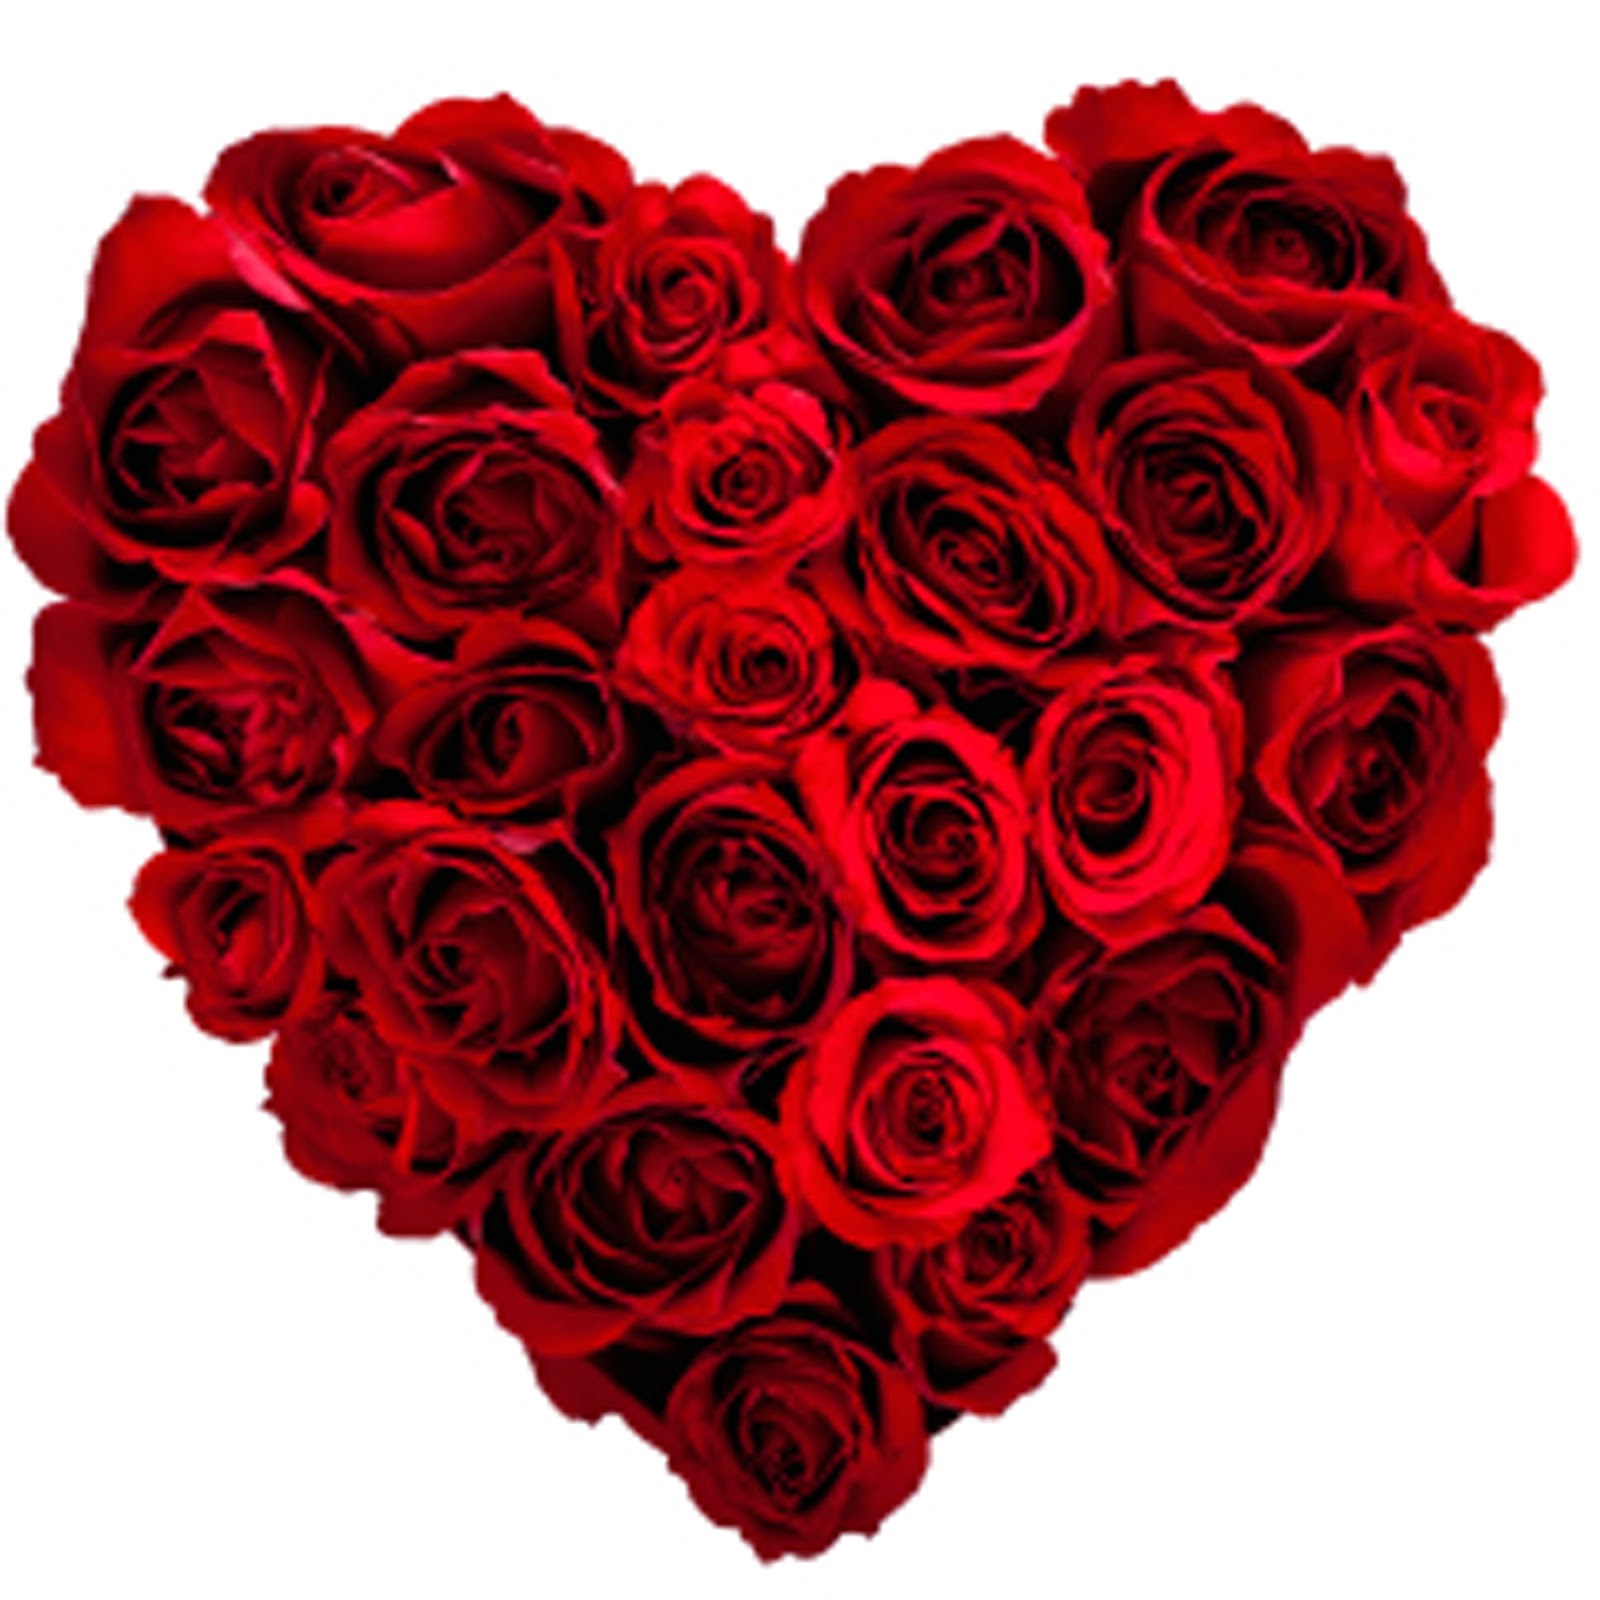 Heart n Love valentines day HD wallpapers 2013 - Full HD photo | I 